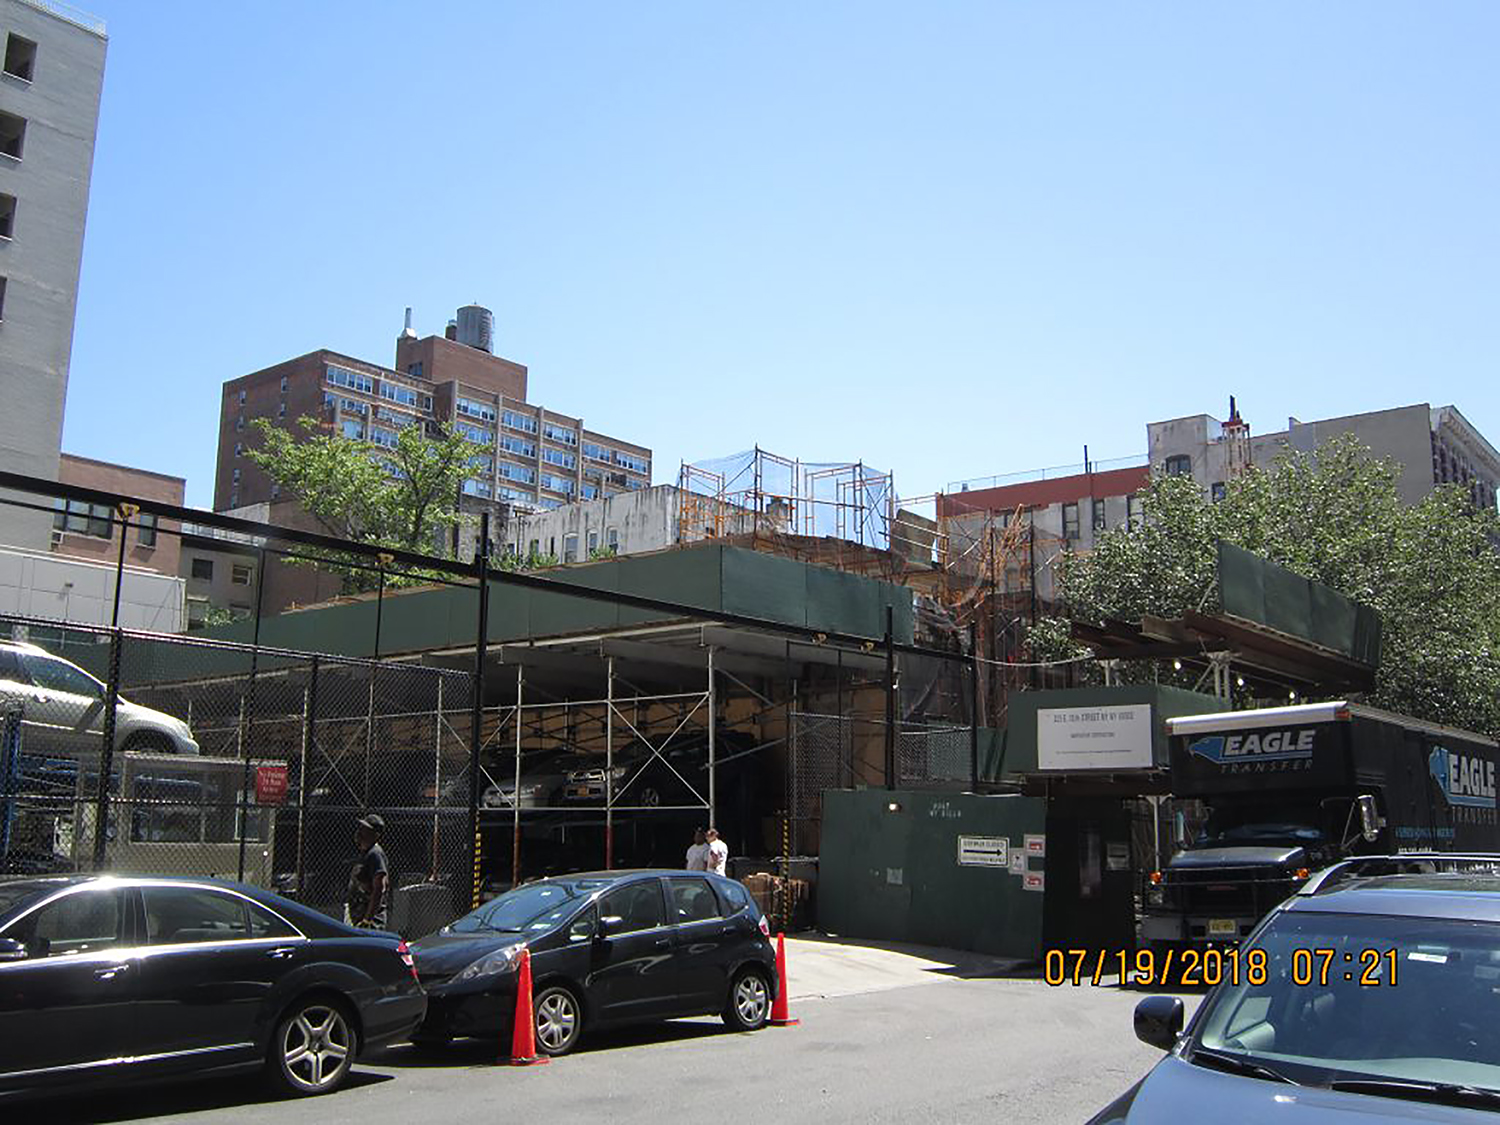 313 East 13th Street in the East Village, Manhattan